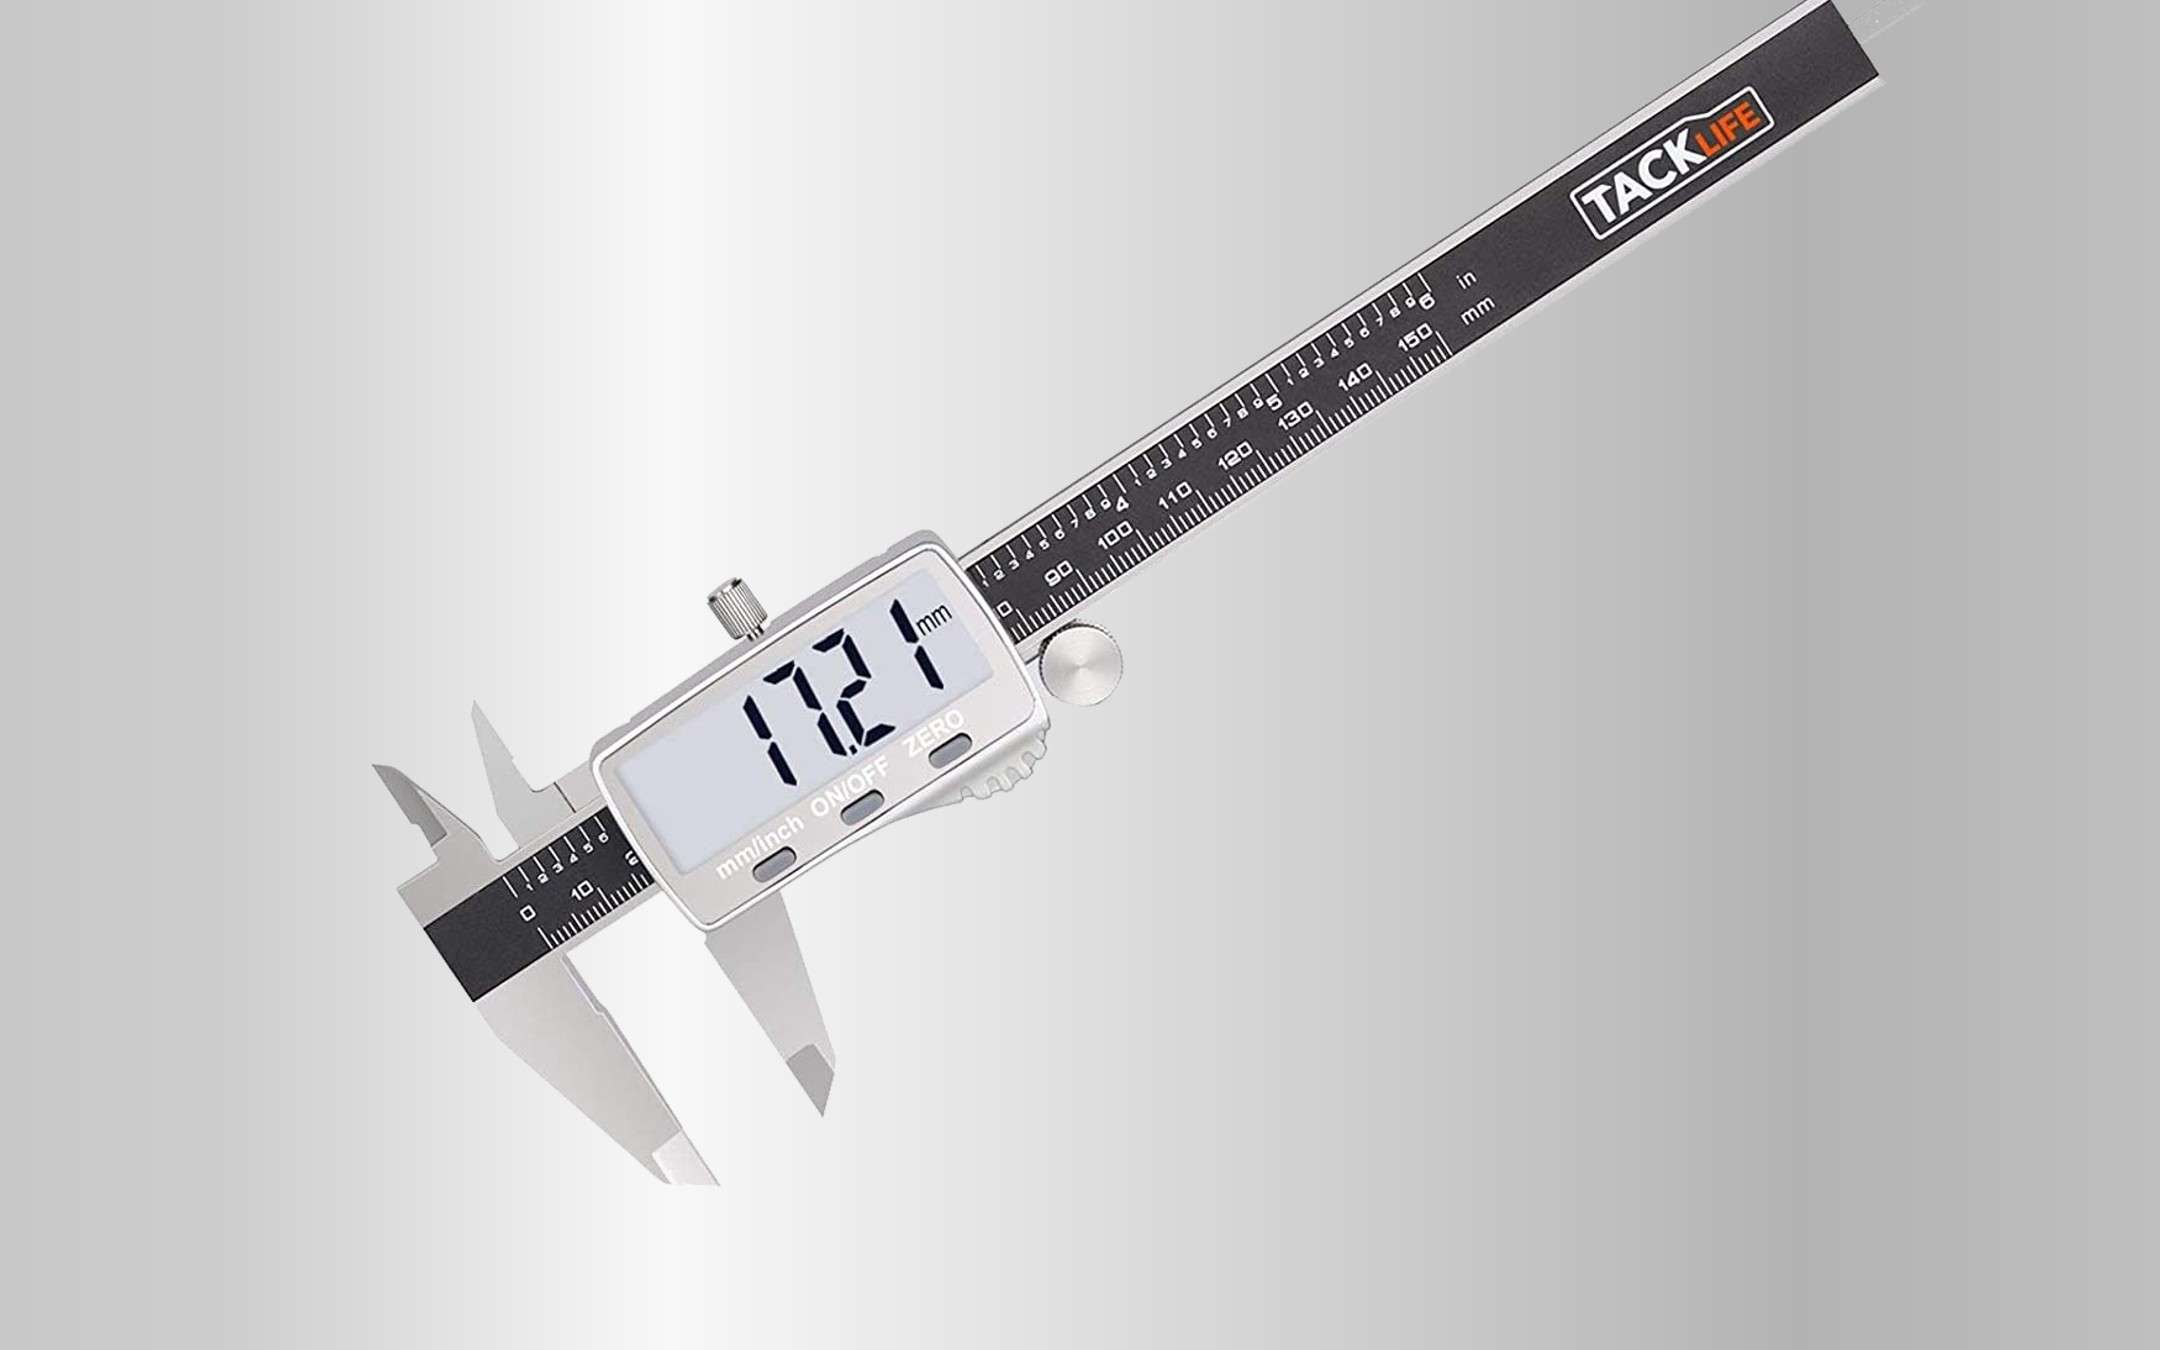 Digital caliper: tradition, innovation and discount